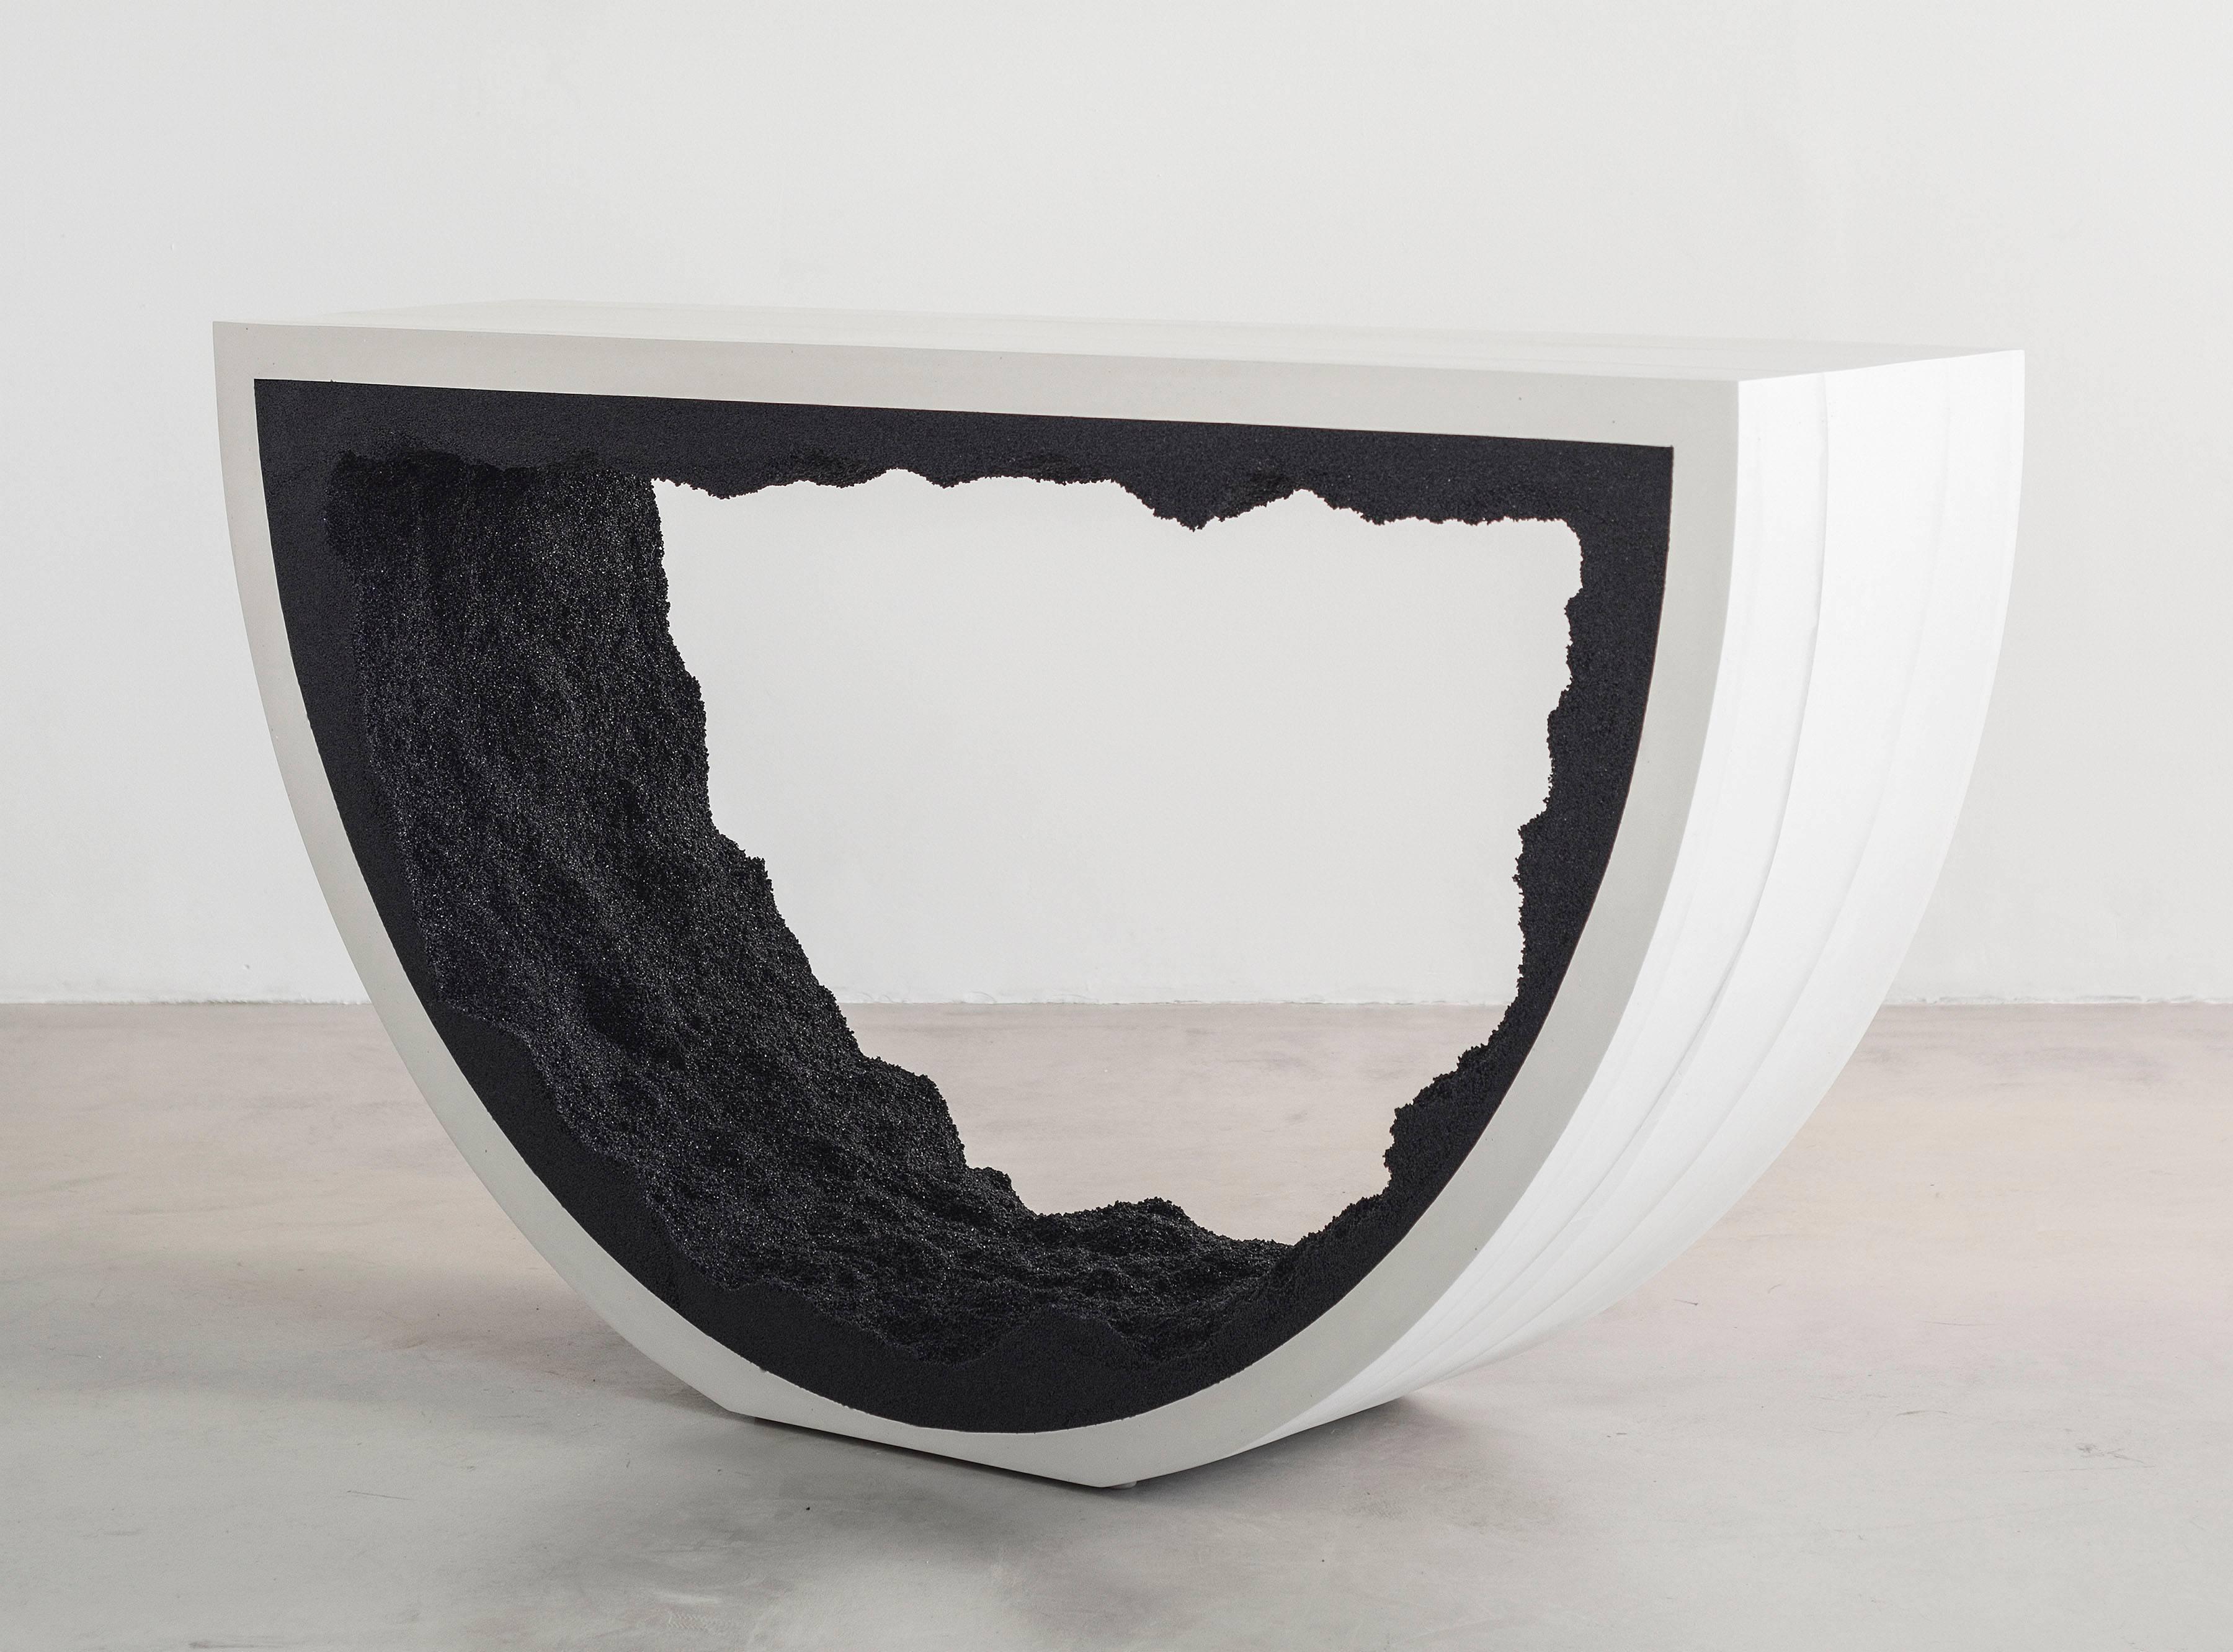 Composed from a combination of materials, the semicircle console consists of a hand-dyed white cement exterior and a rock salt interior. Packed by hand within the smooth white cement, the black silica forms an organic texture to contrast the strong